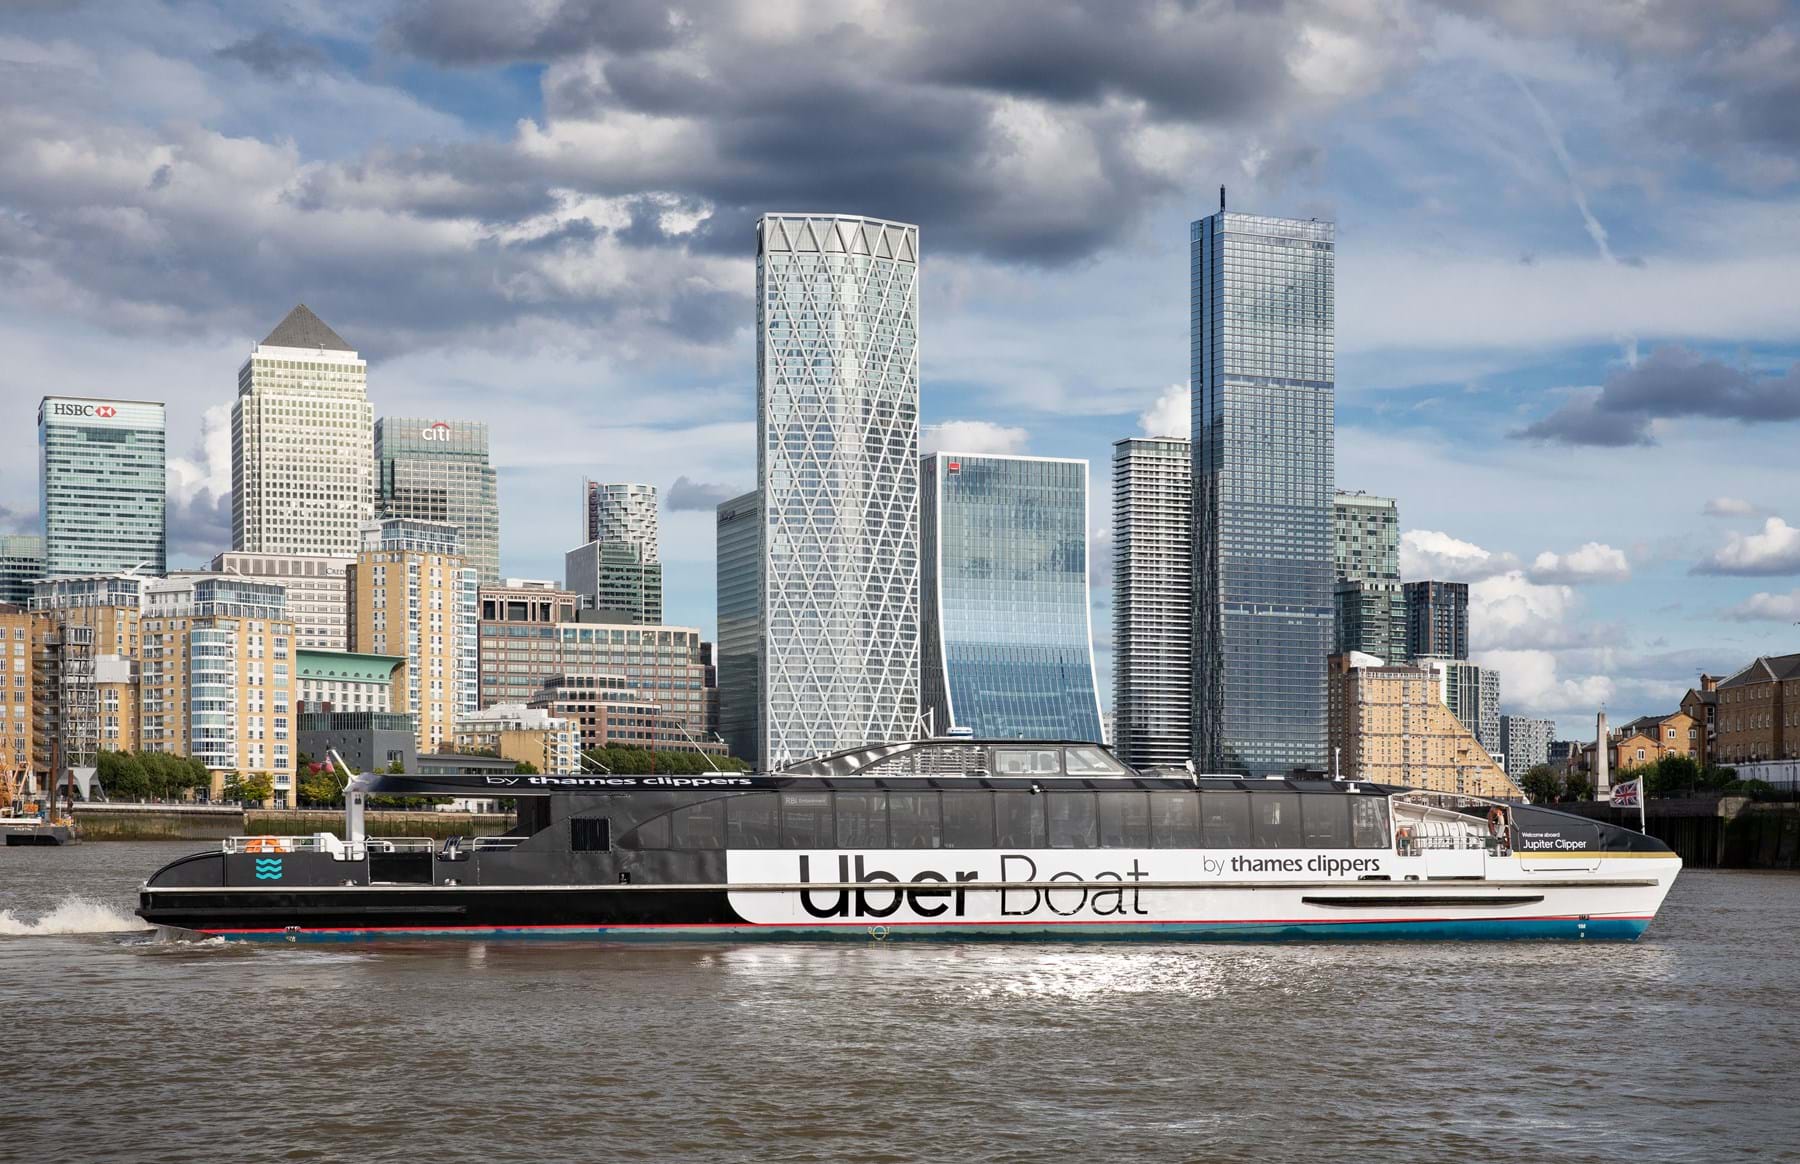 Uber Boat By Thames Clippers at Canary Wharf